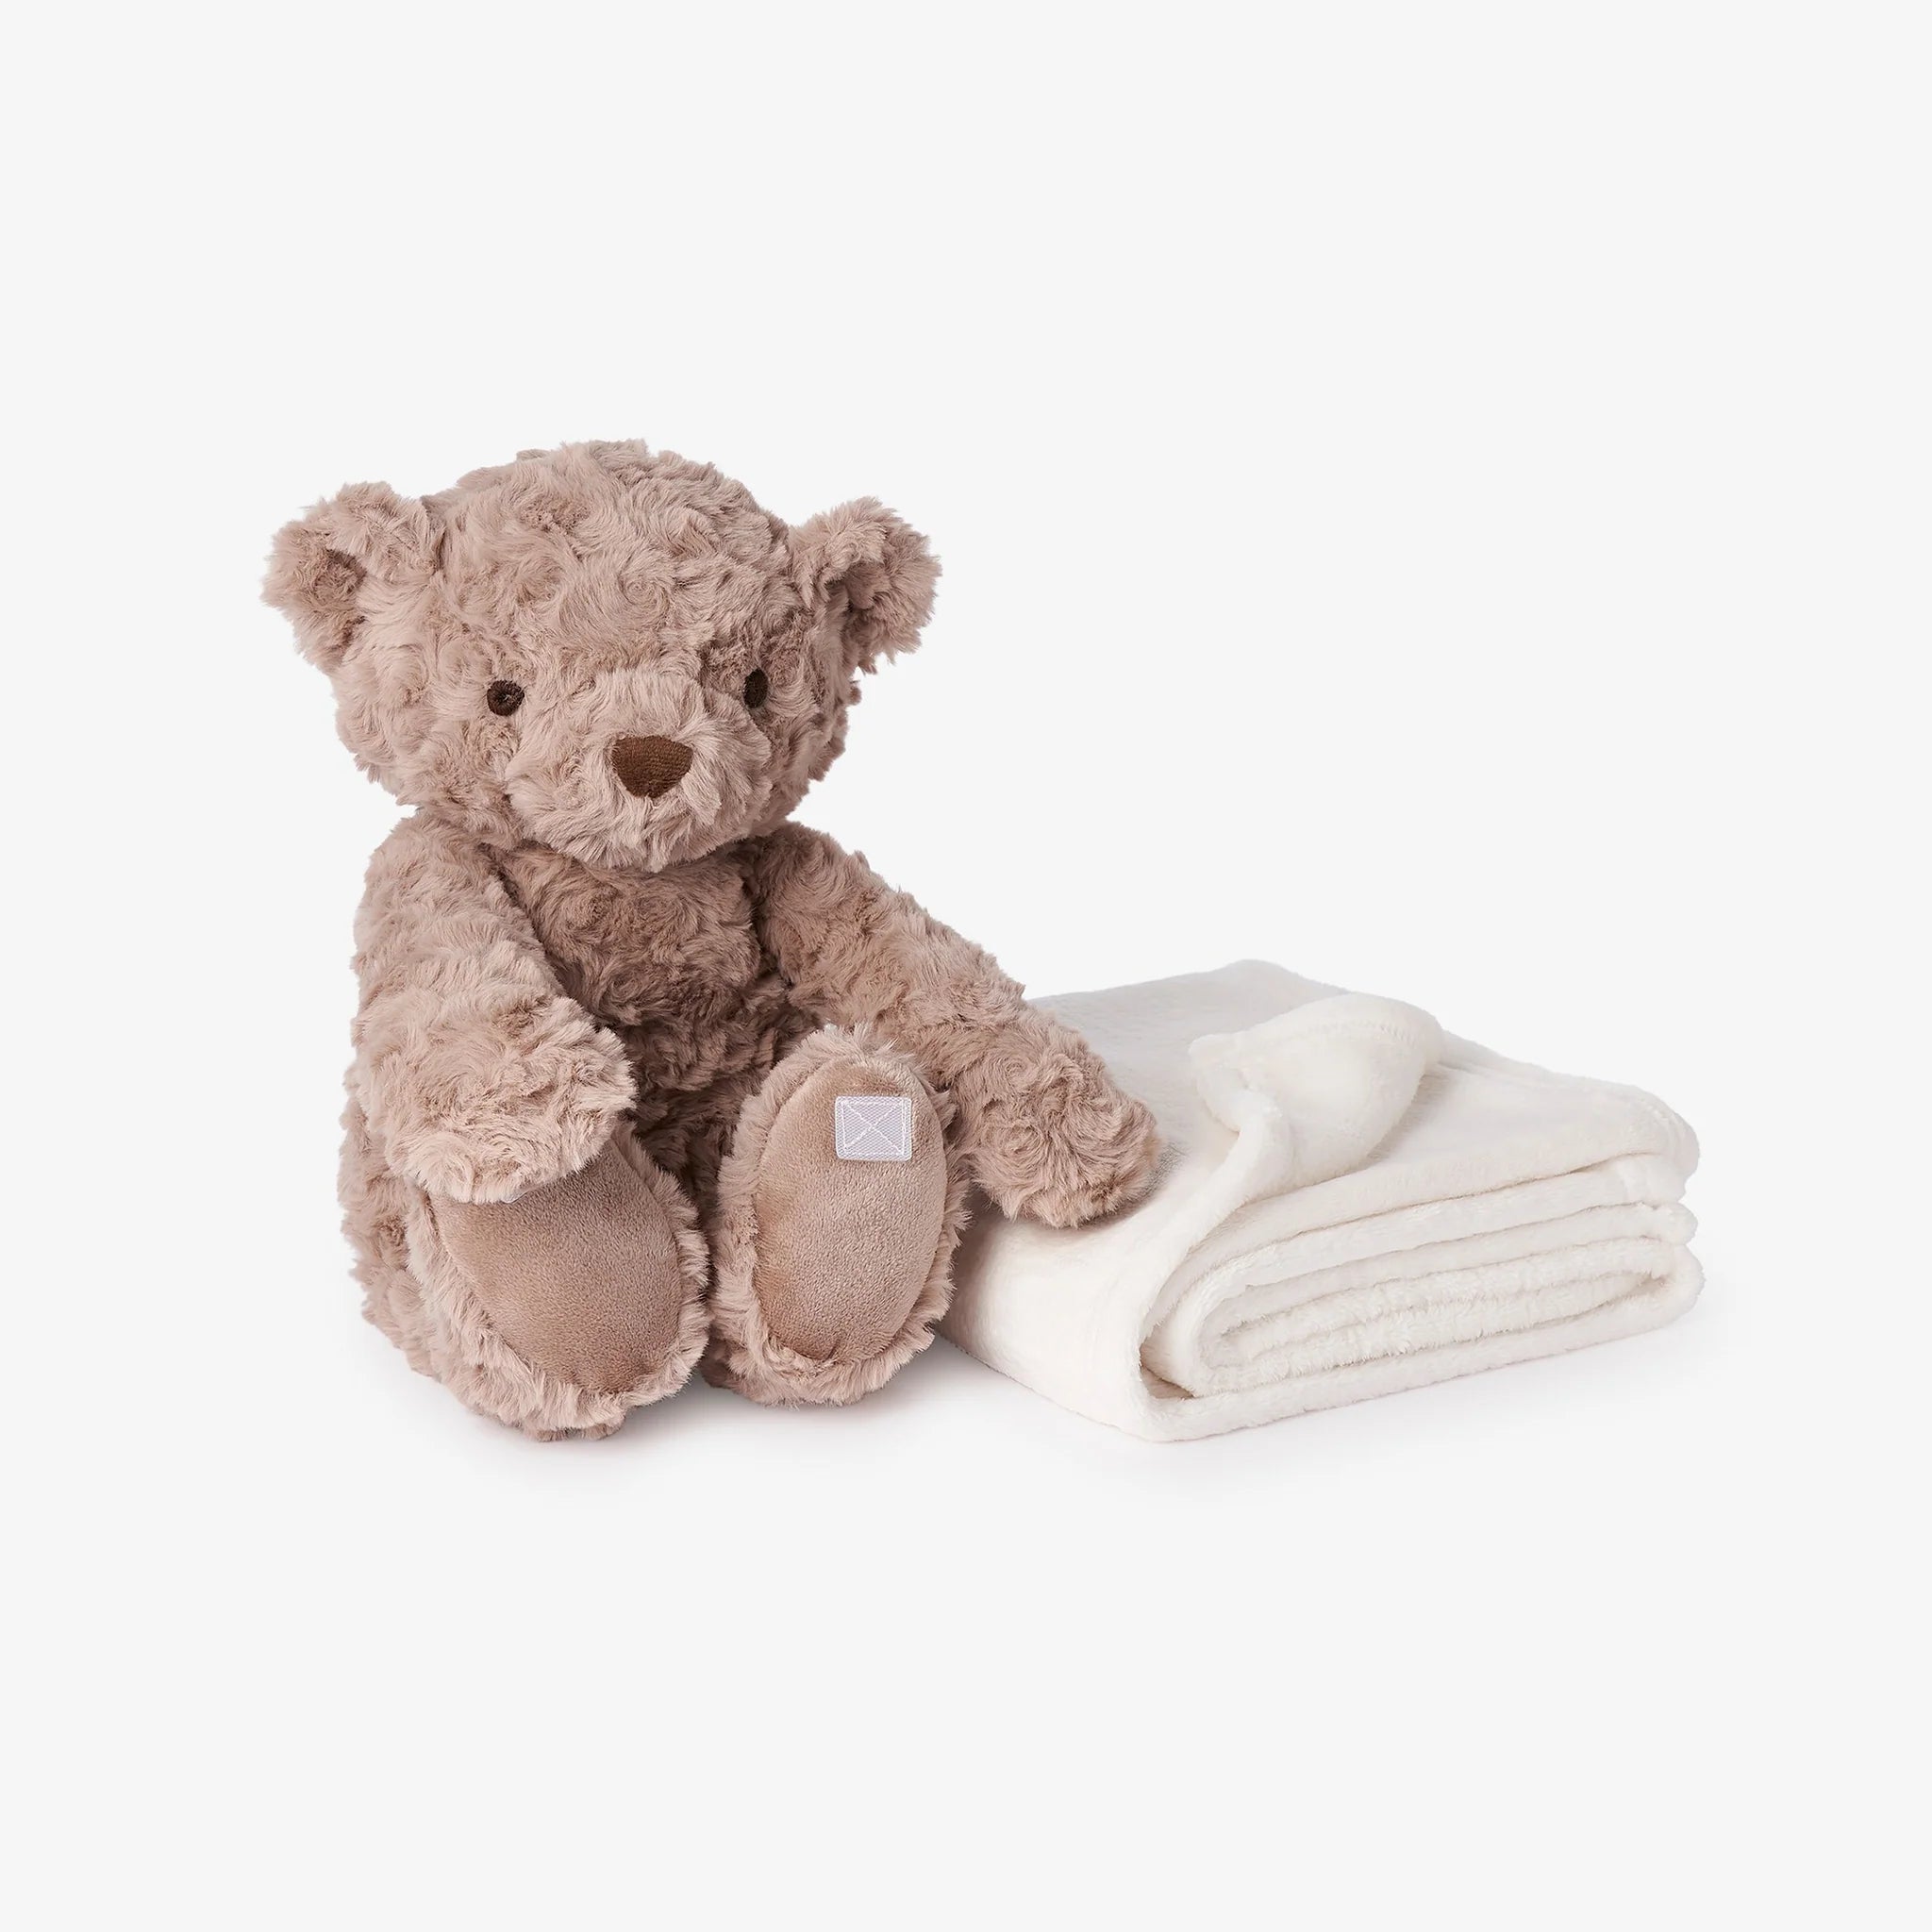 Bear bedtime huggie plush toy with blanket for baby